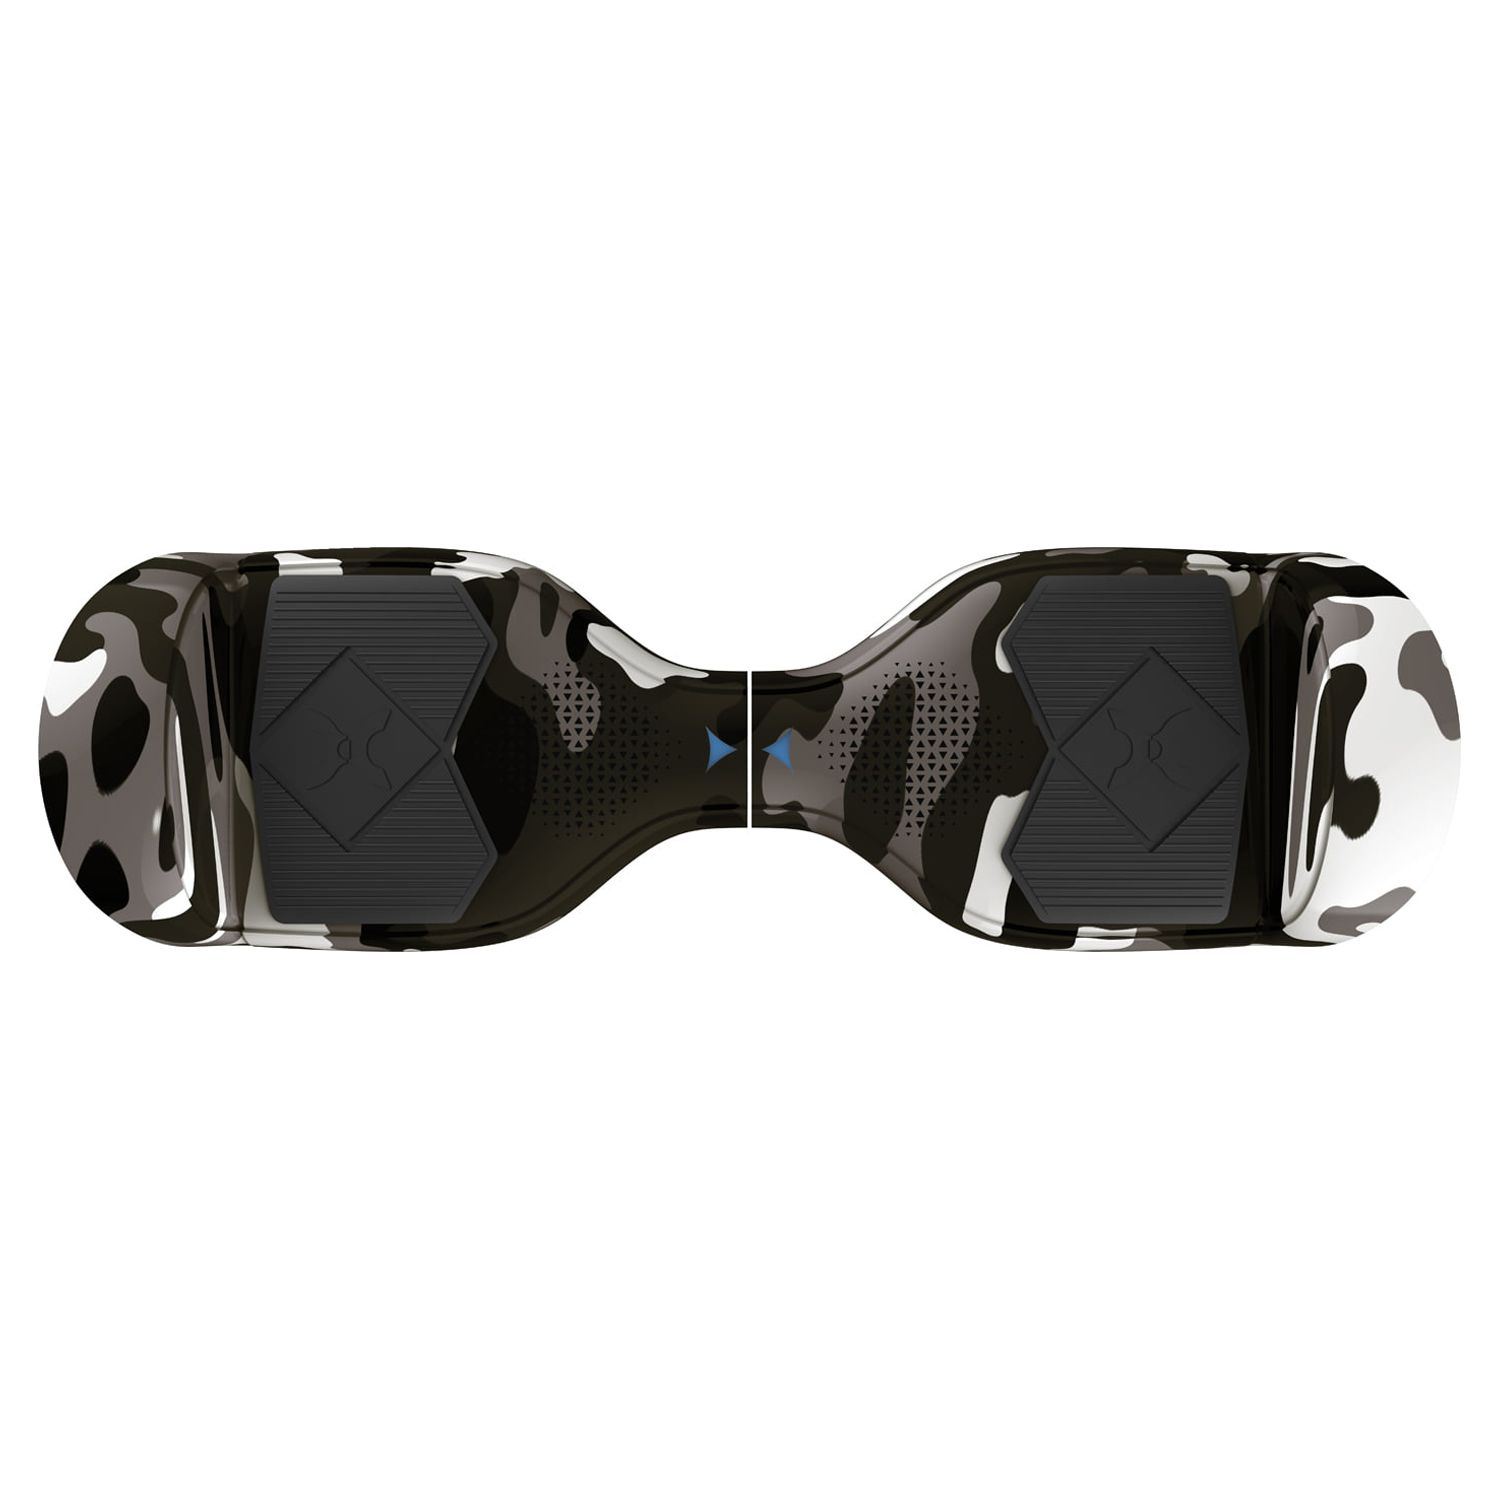 Hover-1 Helix UL Certified Electric Hoverboard with 6.5 In. LED Wheels, LED Sensor Lights, Bluetooth Speaker, Lithium-ion 10 Cell battery, Ages 8+, 160 Lbs Max Weight, Camouflage - image 3 of 10